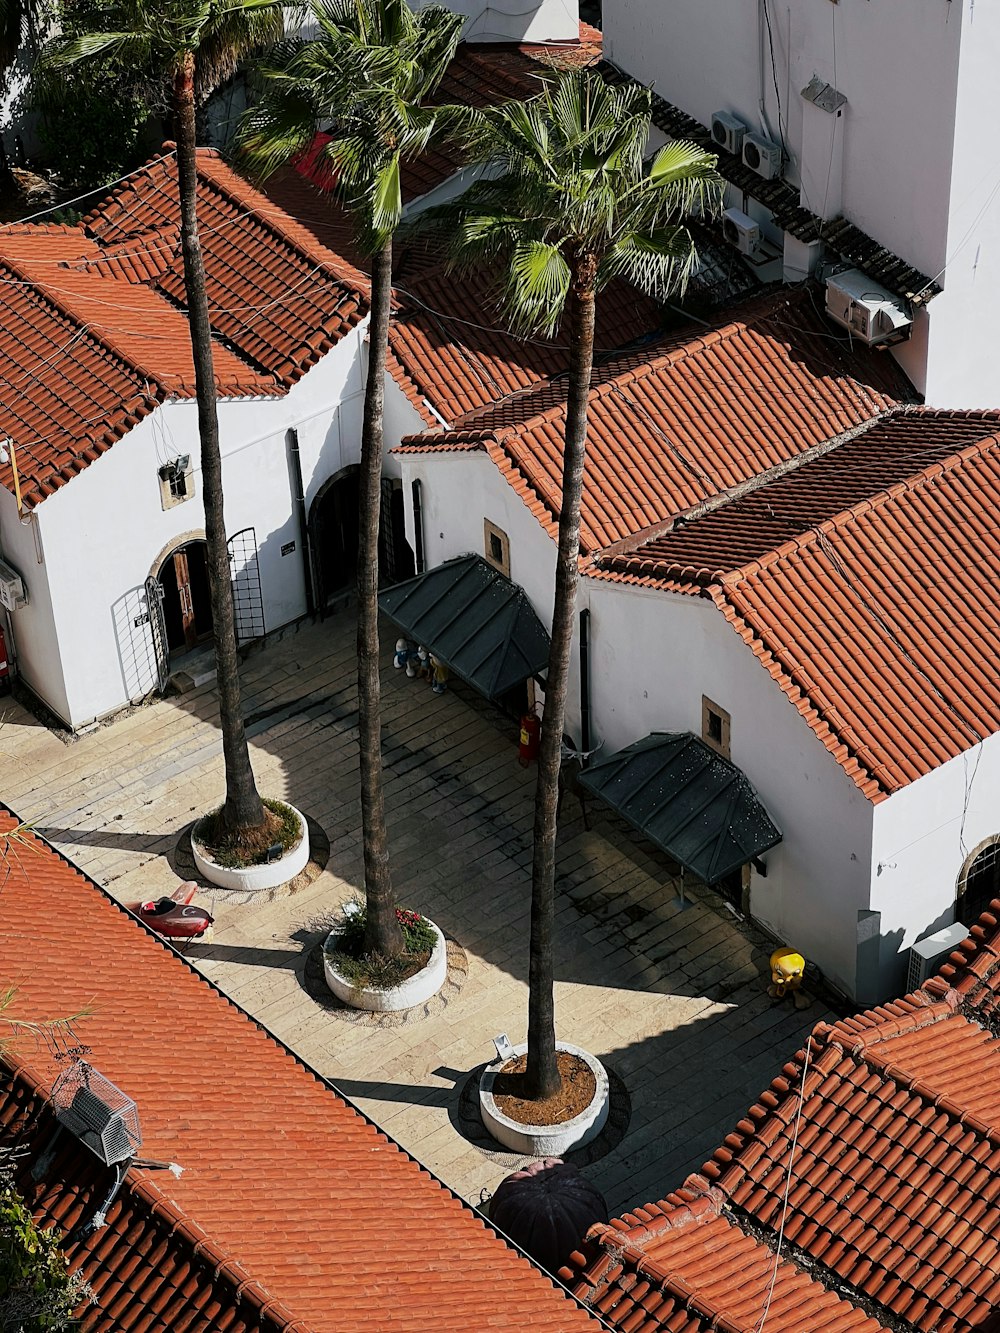 an aerial view of a building with palm trees